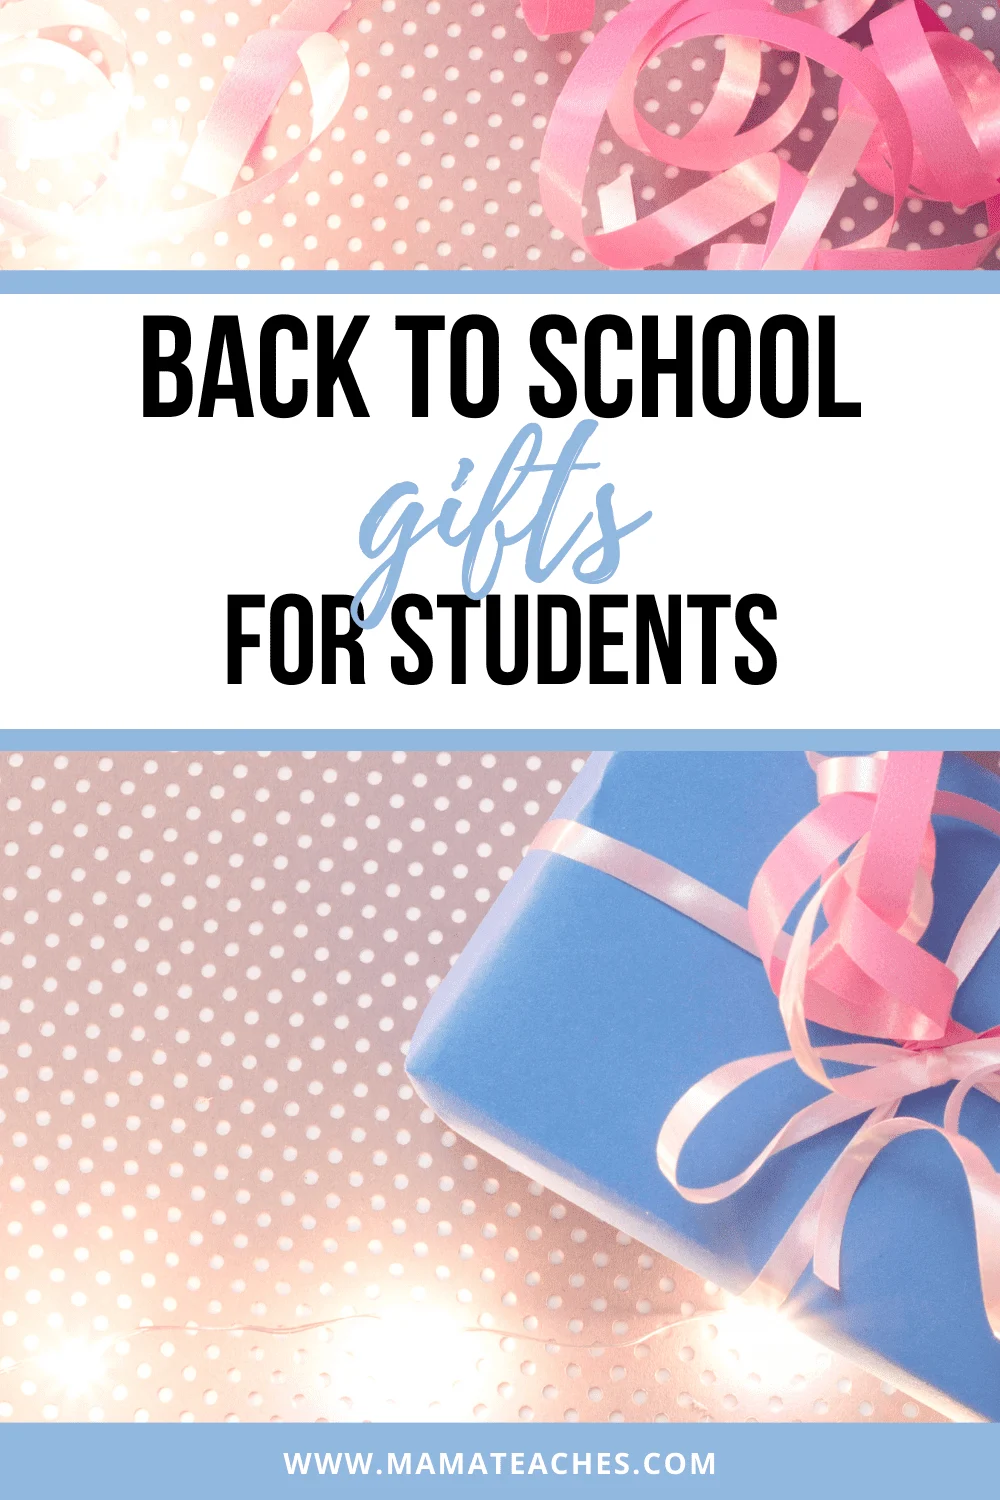 End of Year Gifts for Students